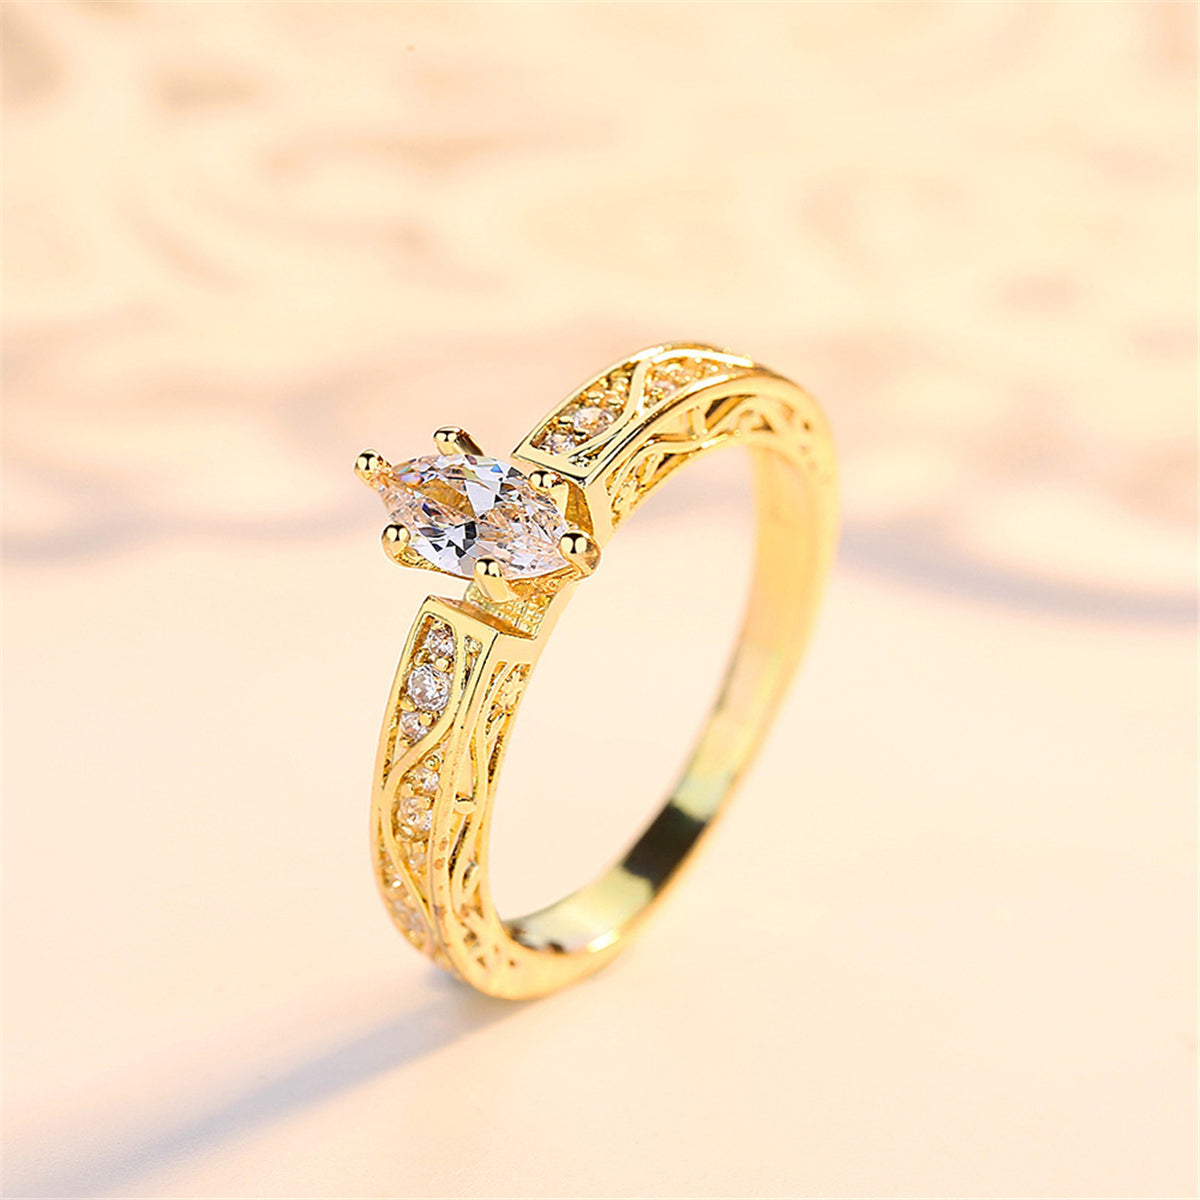 Crystal & Cubic Zirconia Pear-Cut Ring & Ornate Band